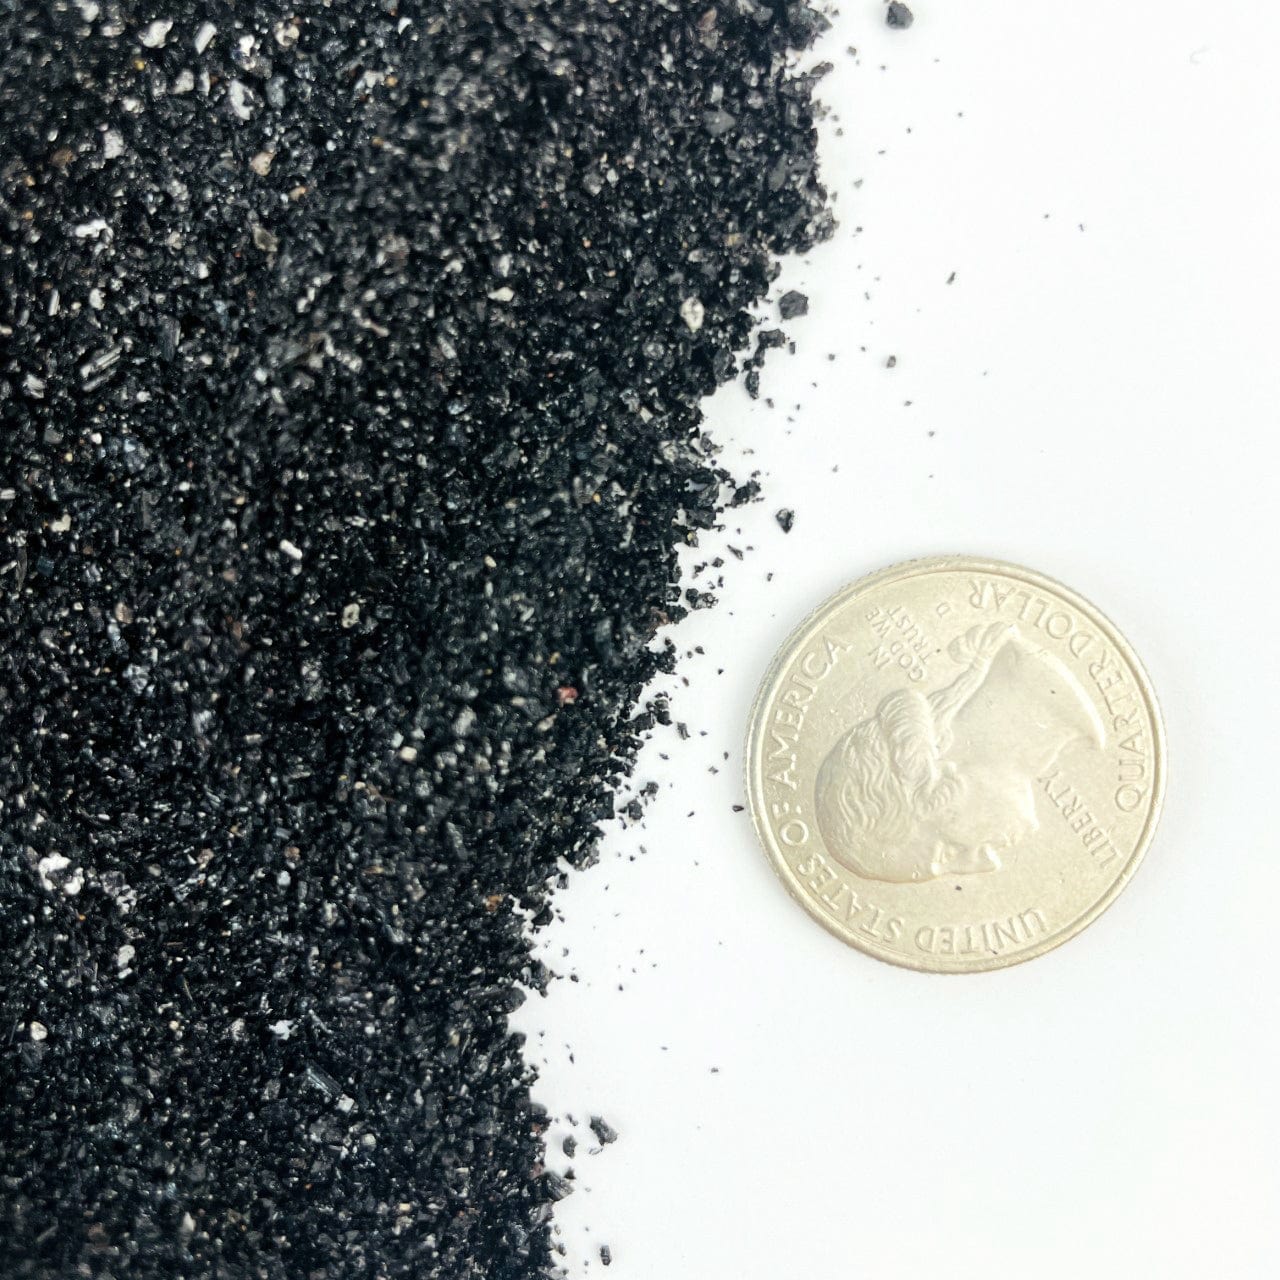 Tourmaline Dust next to a quarter for size reference